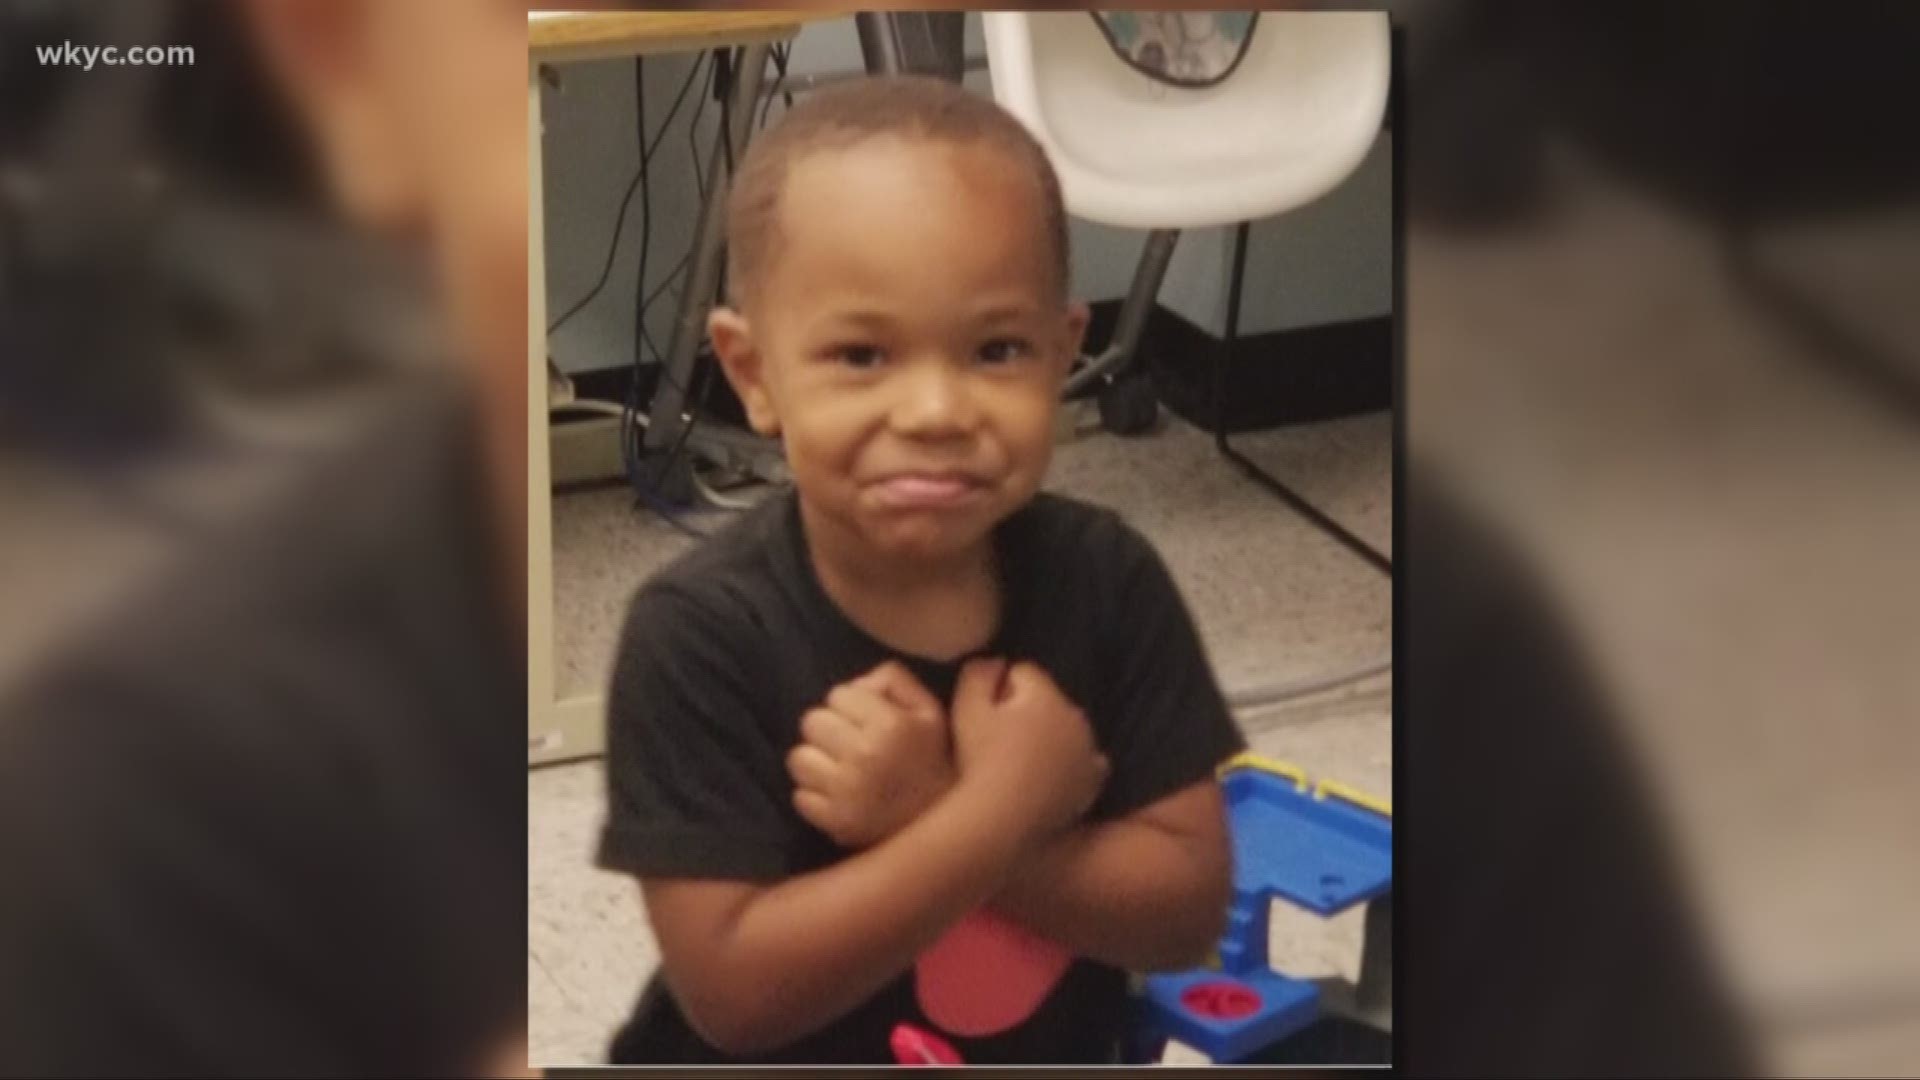 July 5, 2019: We have some great news to share! 
Police confirmed early Friday morning that they've located the family of a young boy who was found wandering Euclid alone. Identified by authorities as 'Noah Doe,' the child was found wandering North Vine Street and Ljubljana Drive on Thursday afternoon. A neighbor found him walking and called police.